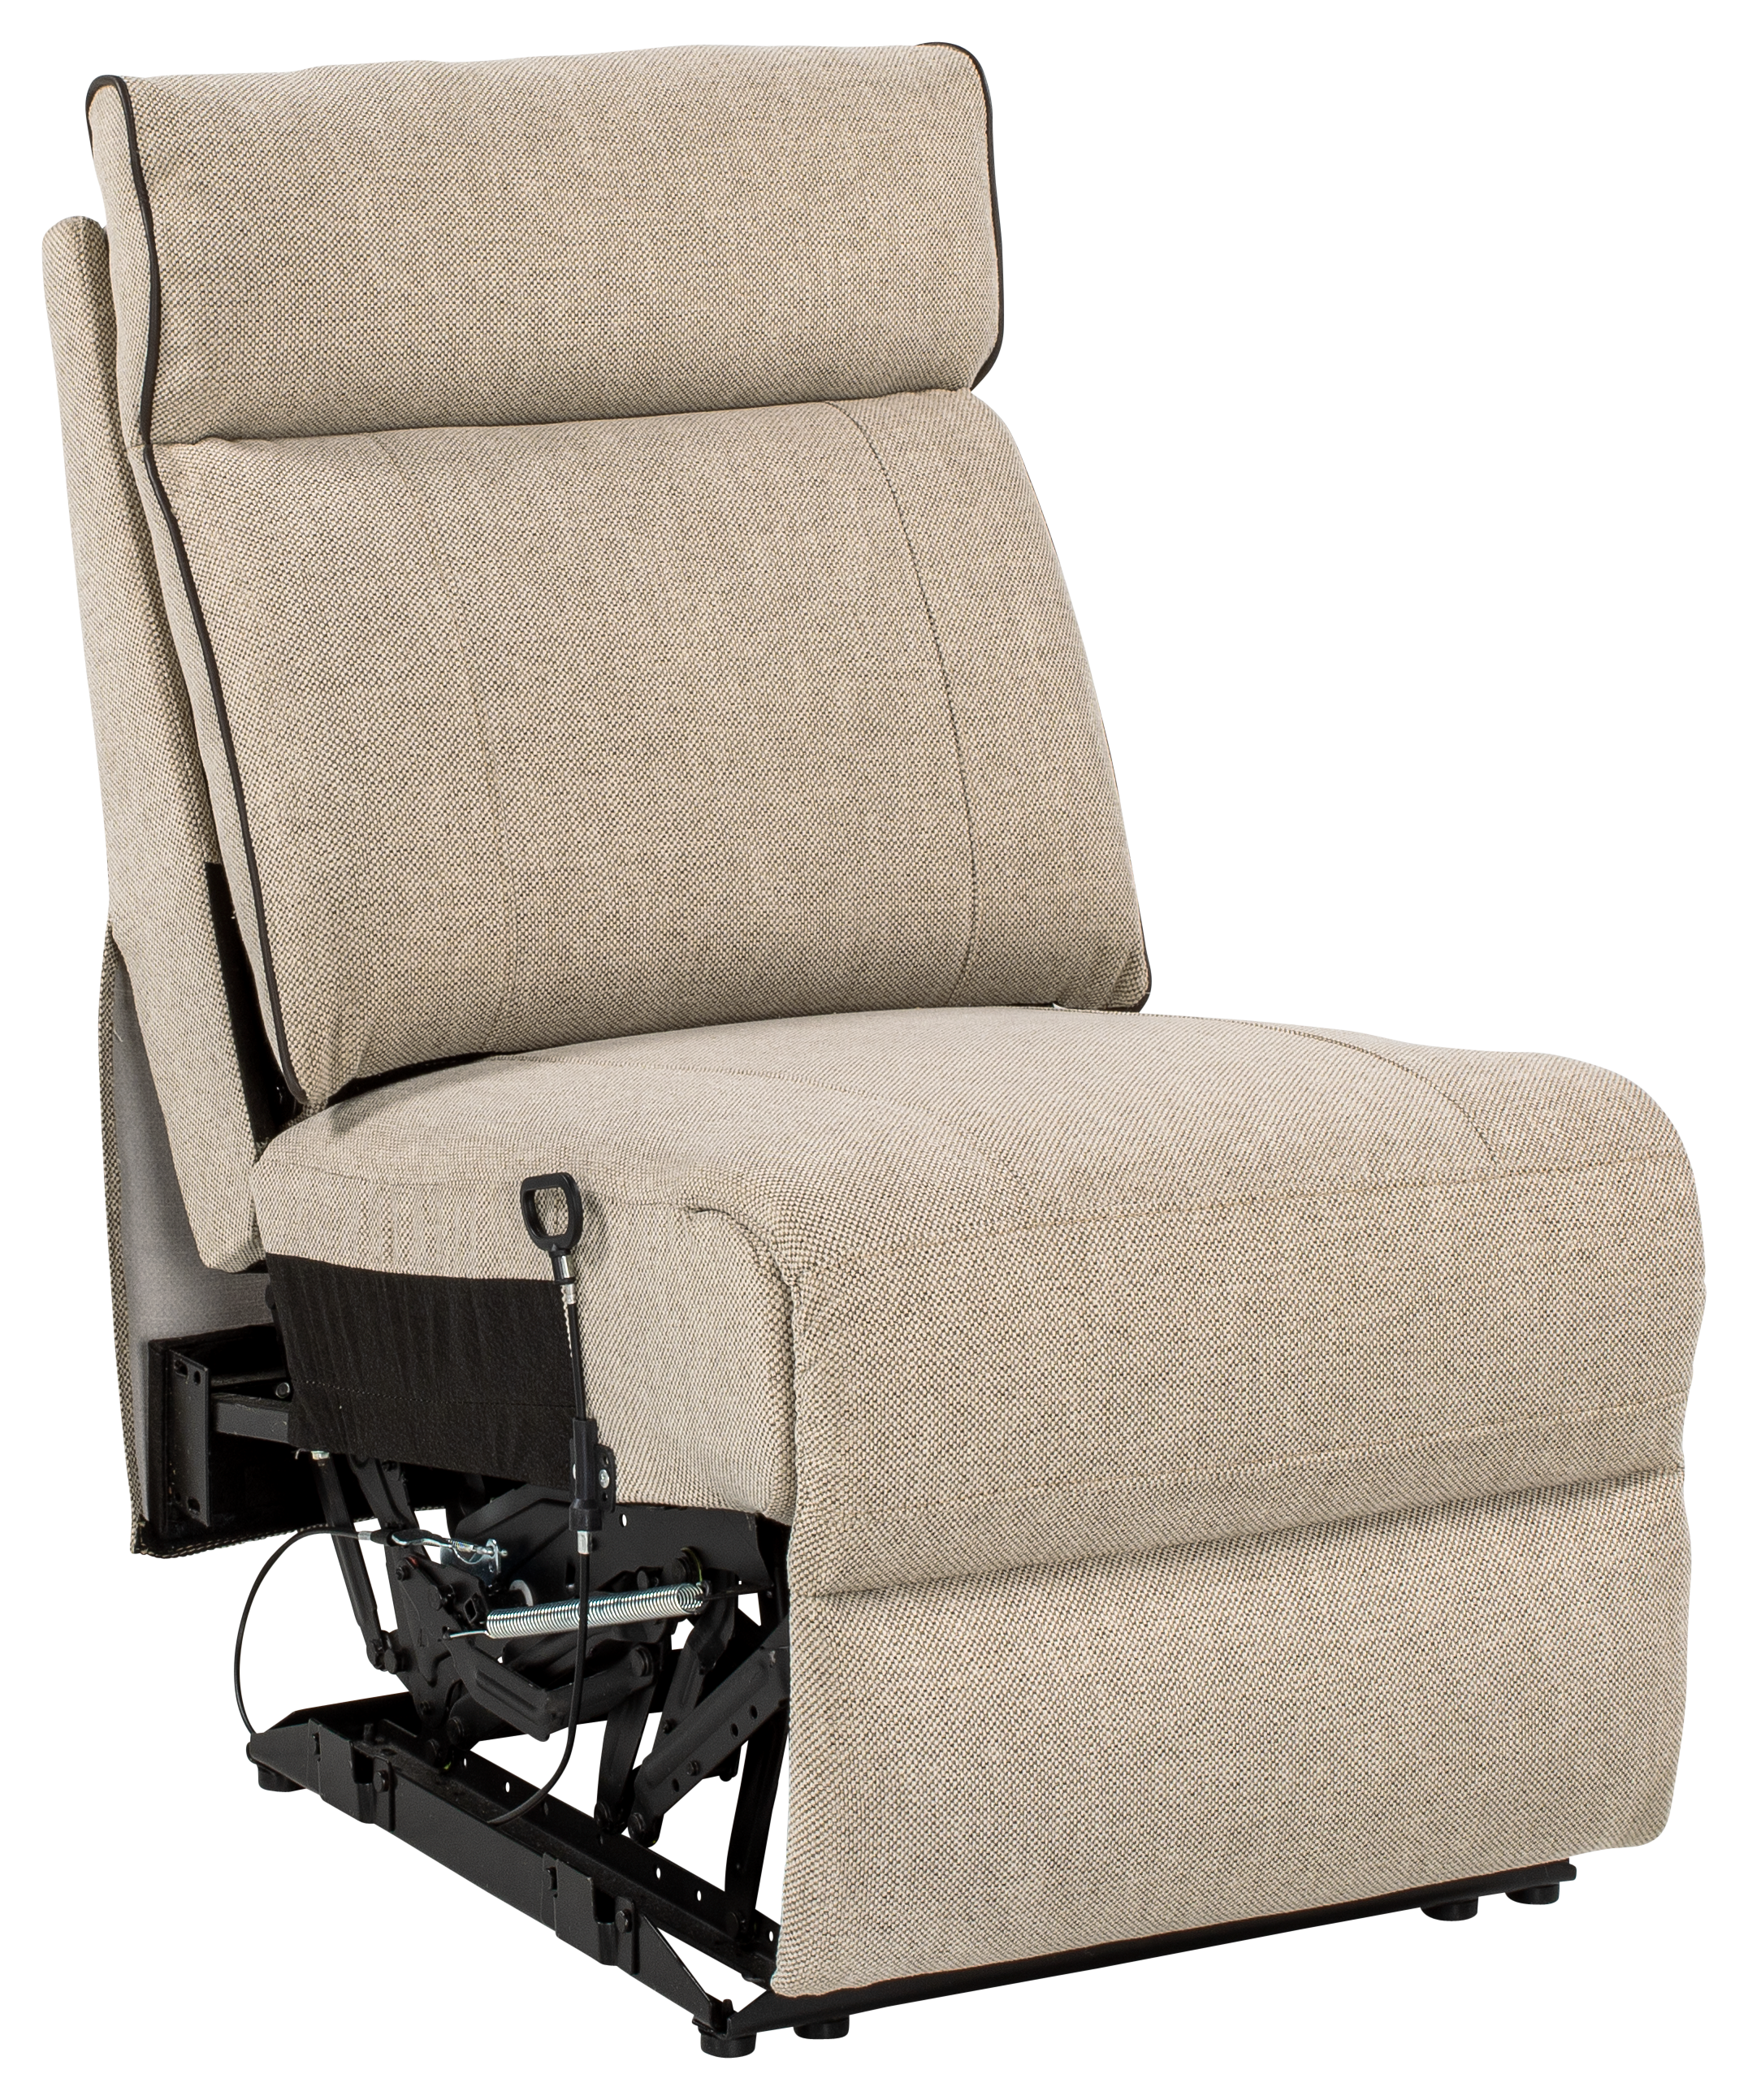 Thomas Payne Norlina RV Furniture Collection Heritage Series Armless Recliner